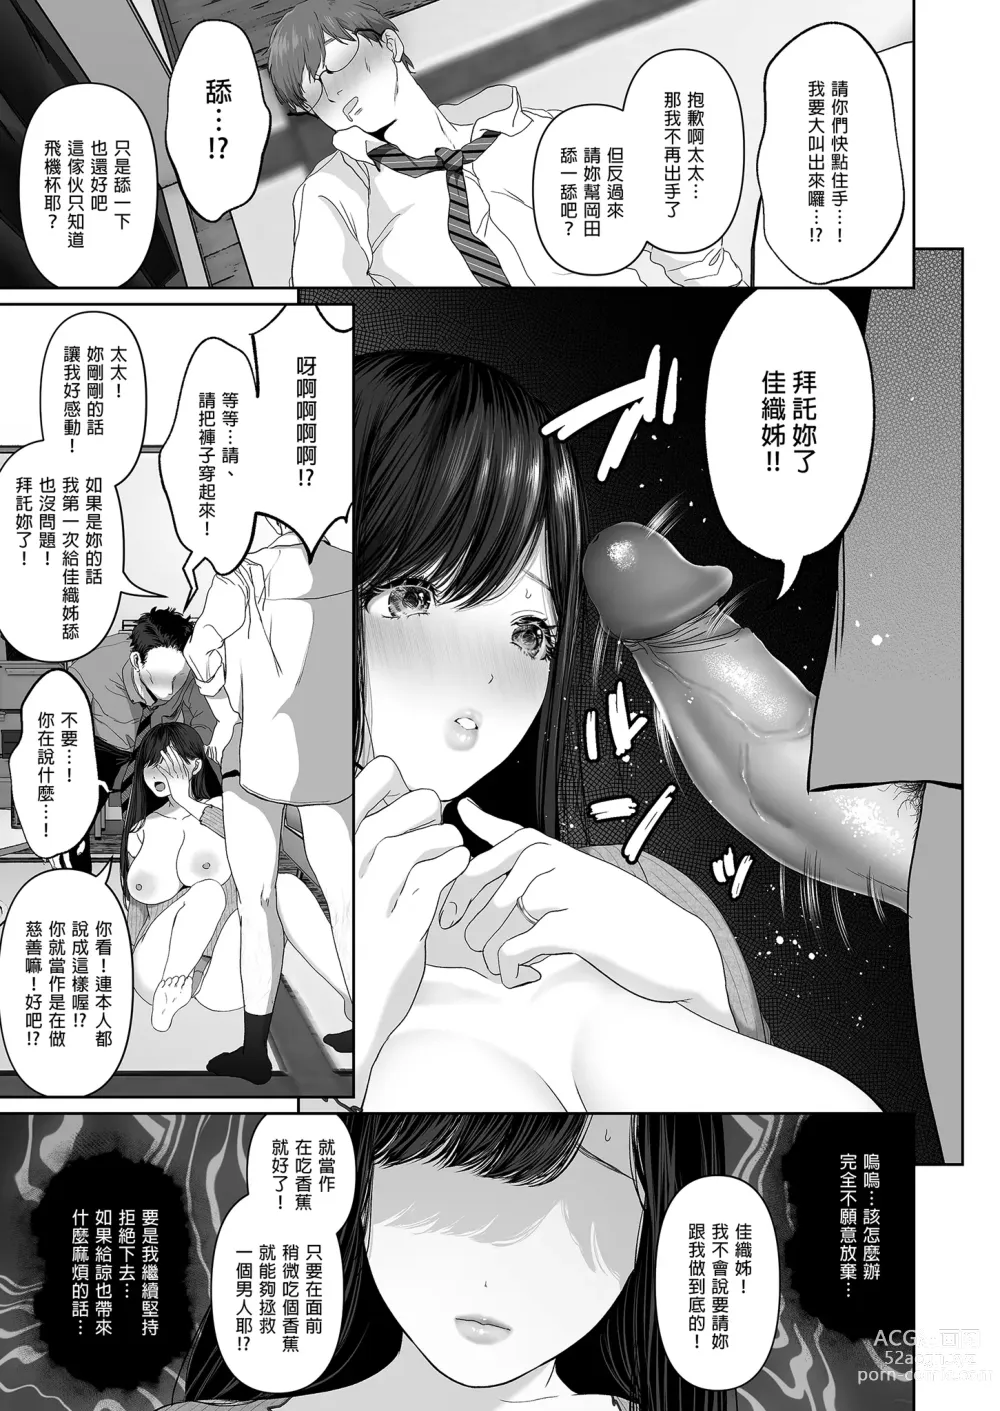 Page 7 of manga Wakaba is where you want to be. Summary edition ~Married Woman Pure Love NTR~ (uncensored)